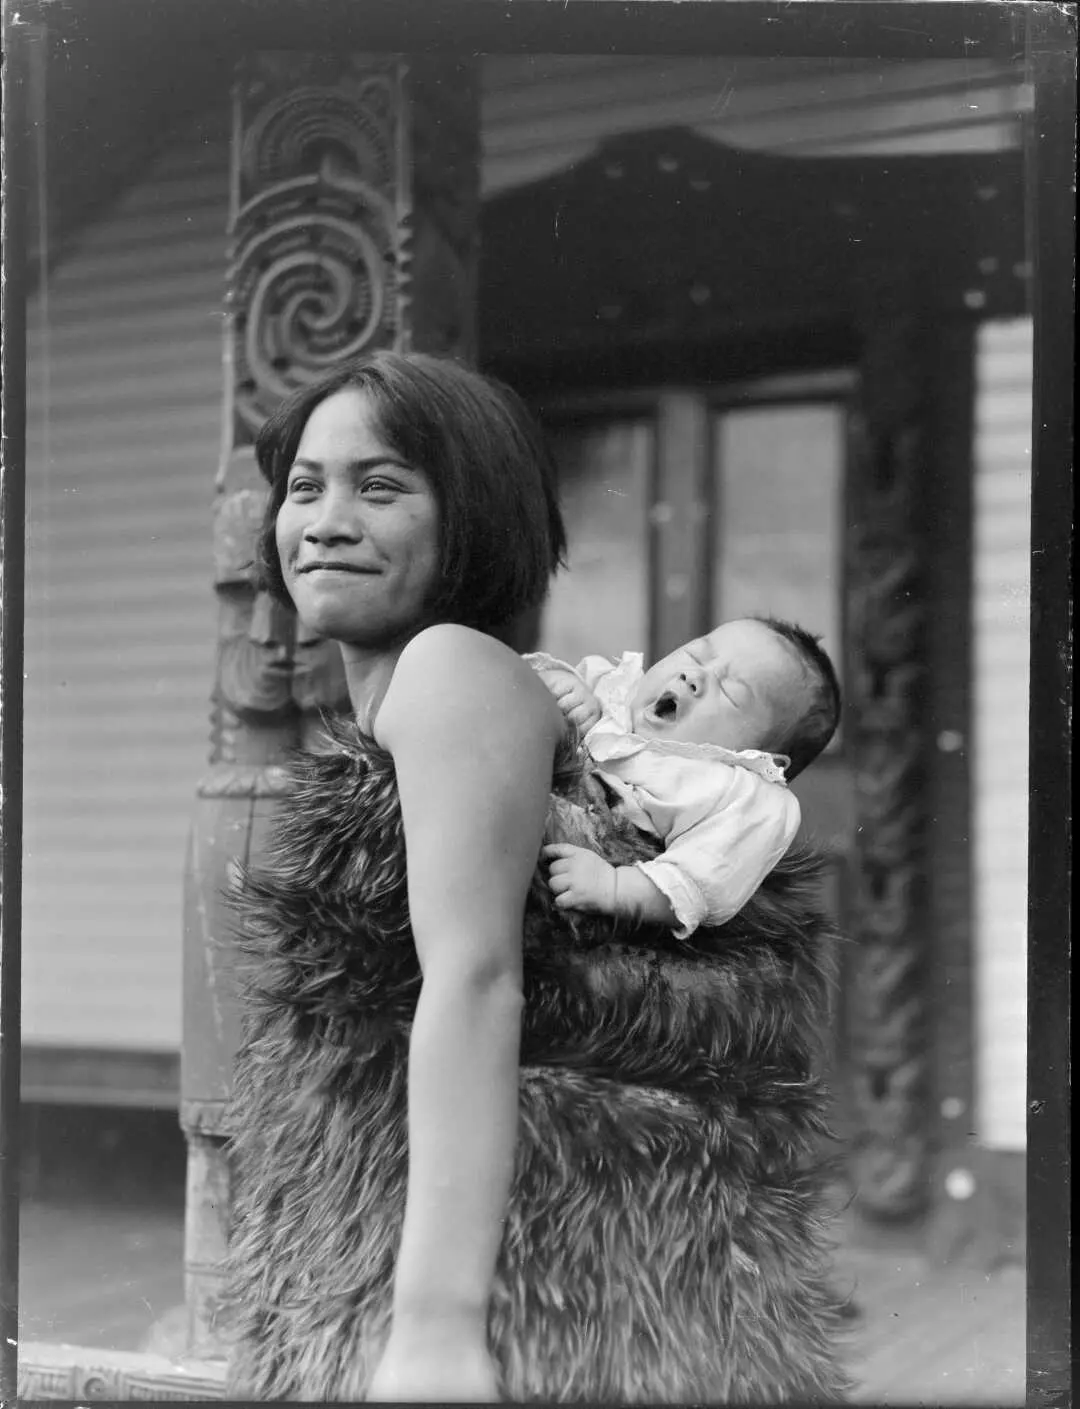 Maori woman carrying a young child on her back wrapped in a feather cloak. Ref: WA-12537-G